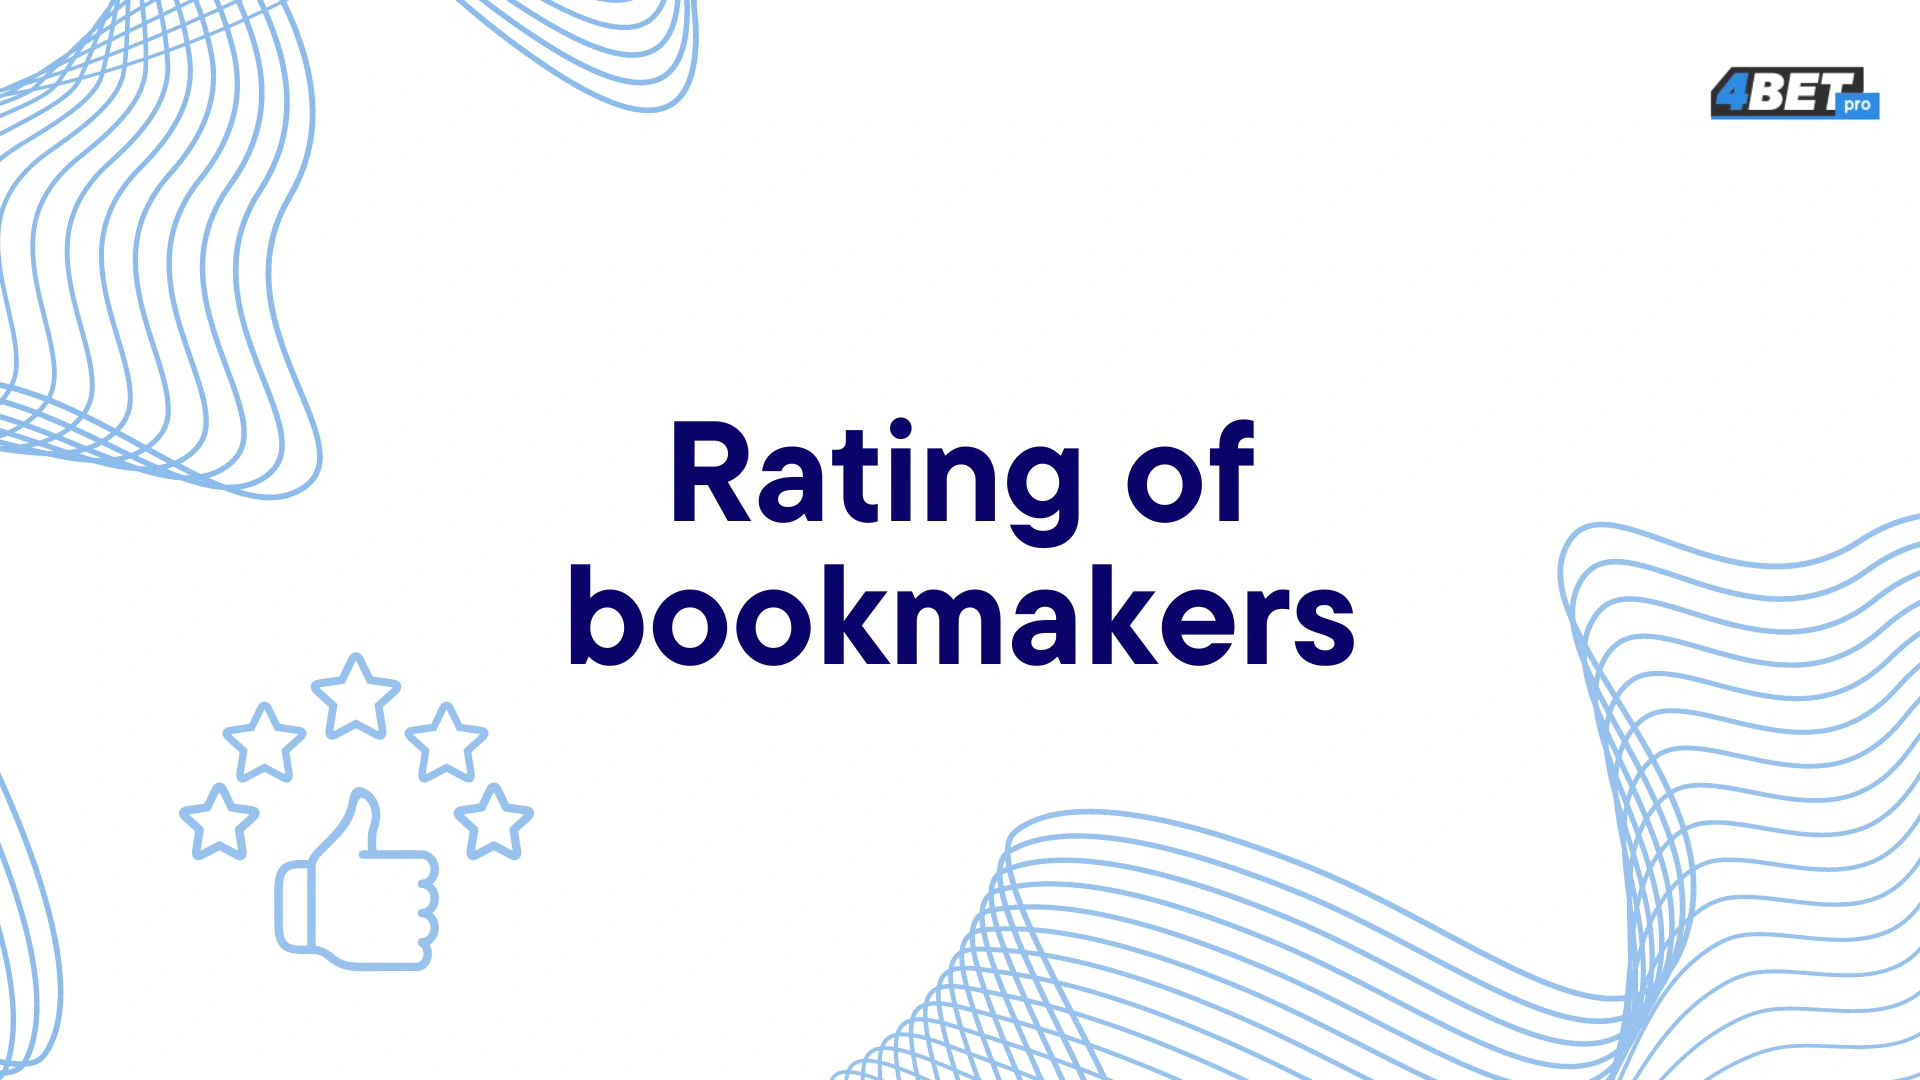 Bookmakers rating by payouts